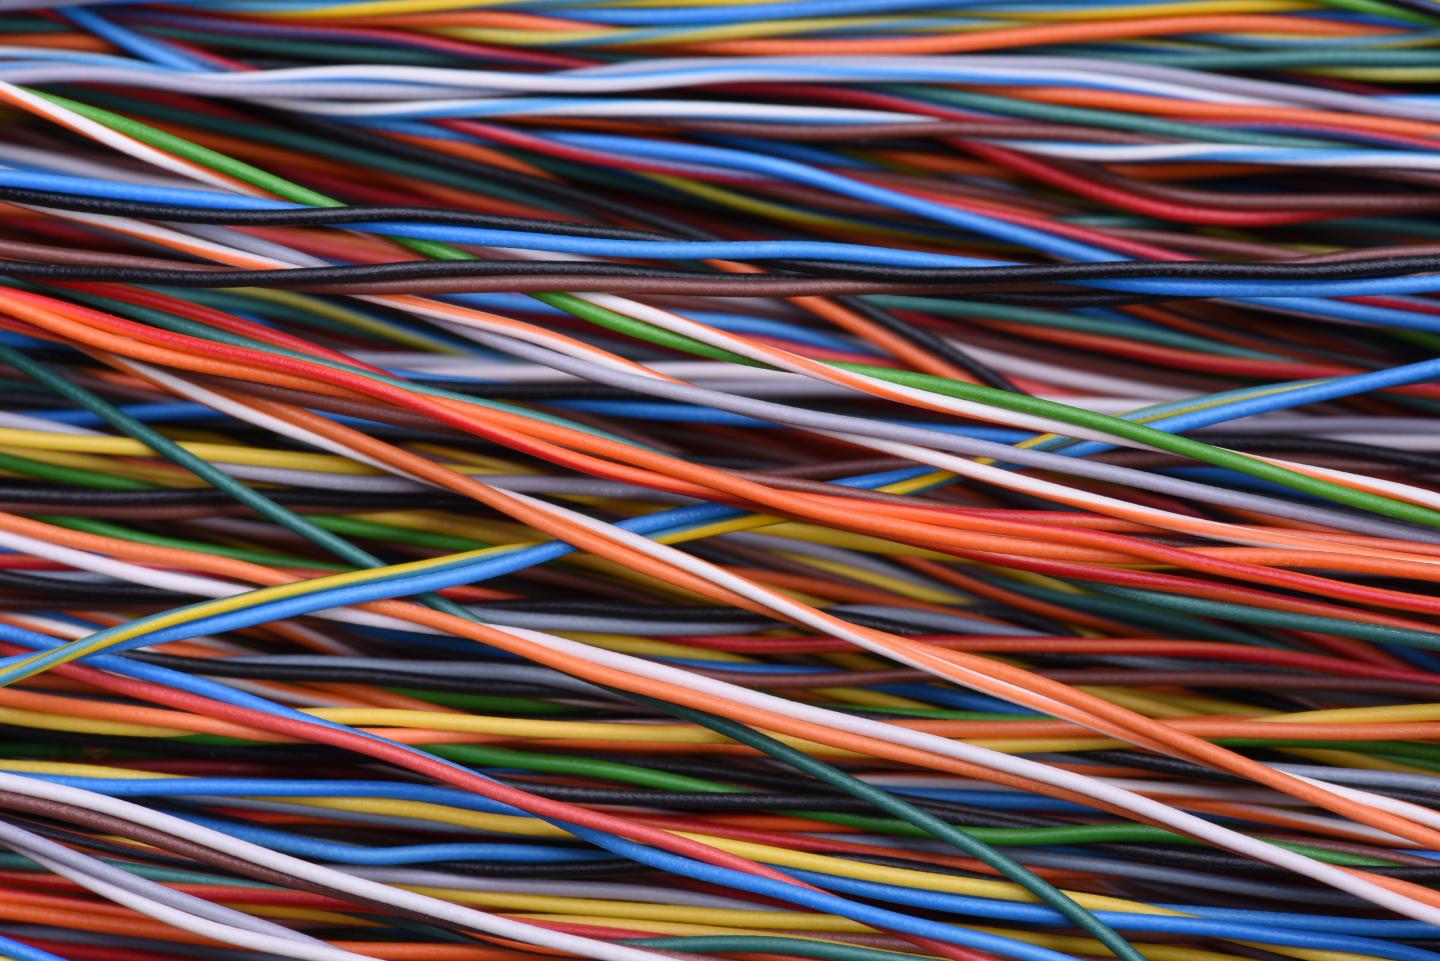 Better Electrical Cables Can Save Energy